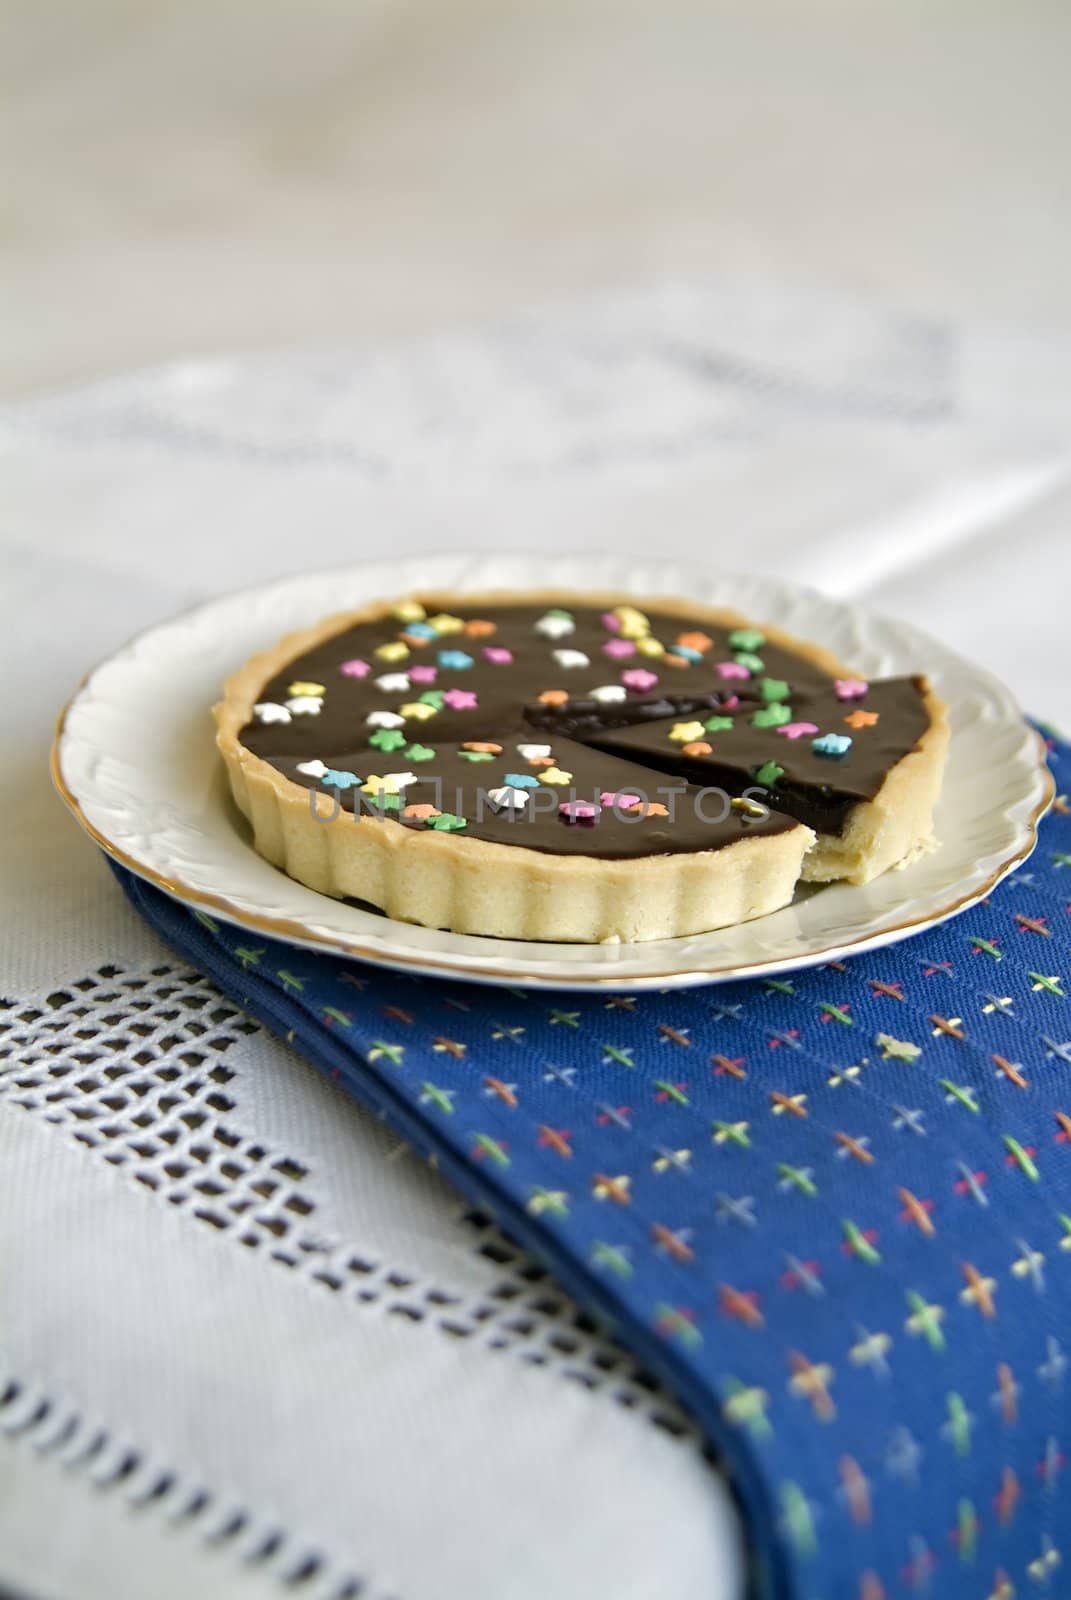 Chocolate Tart with colorful star candies